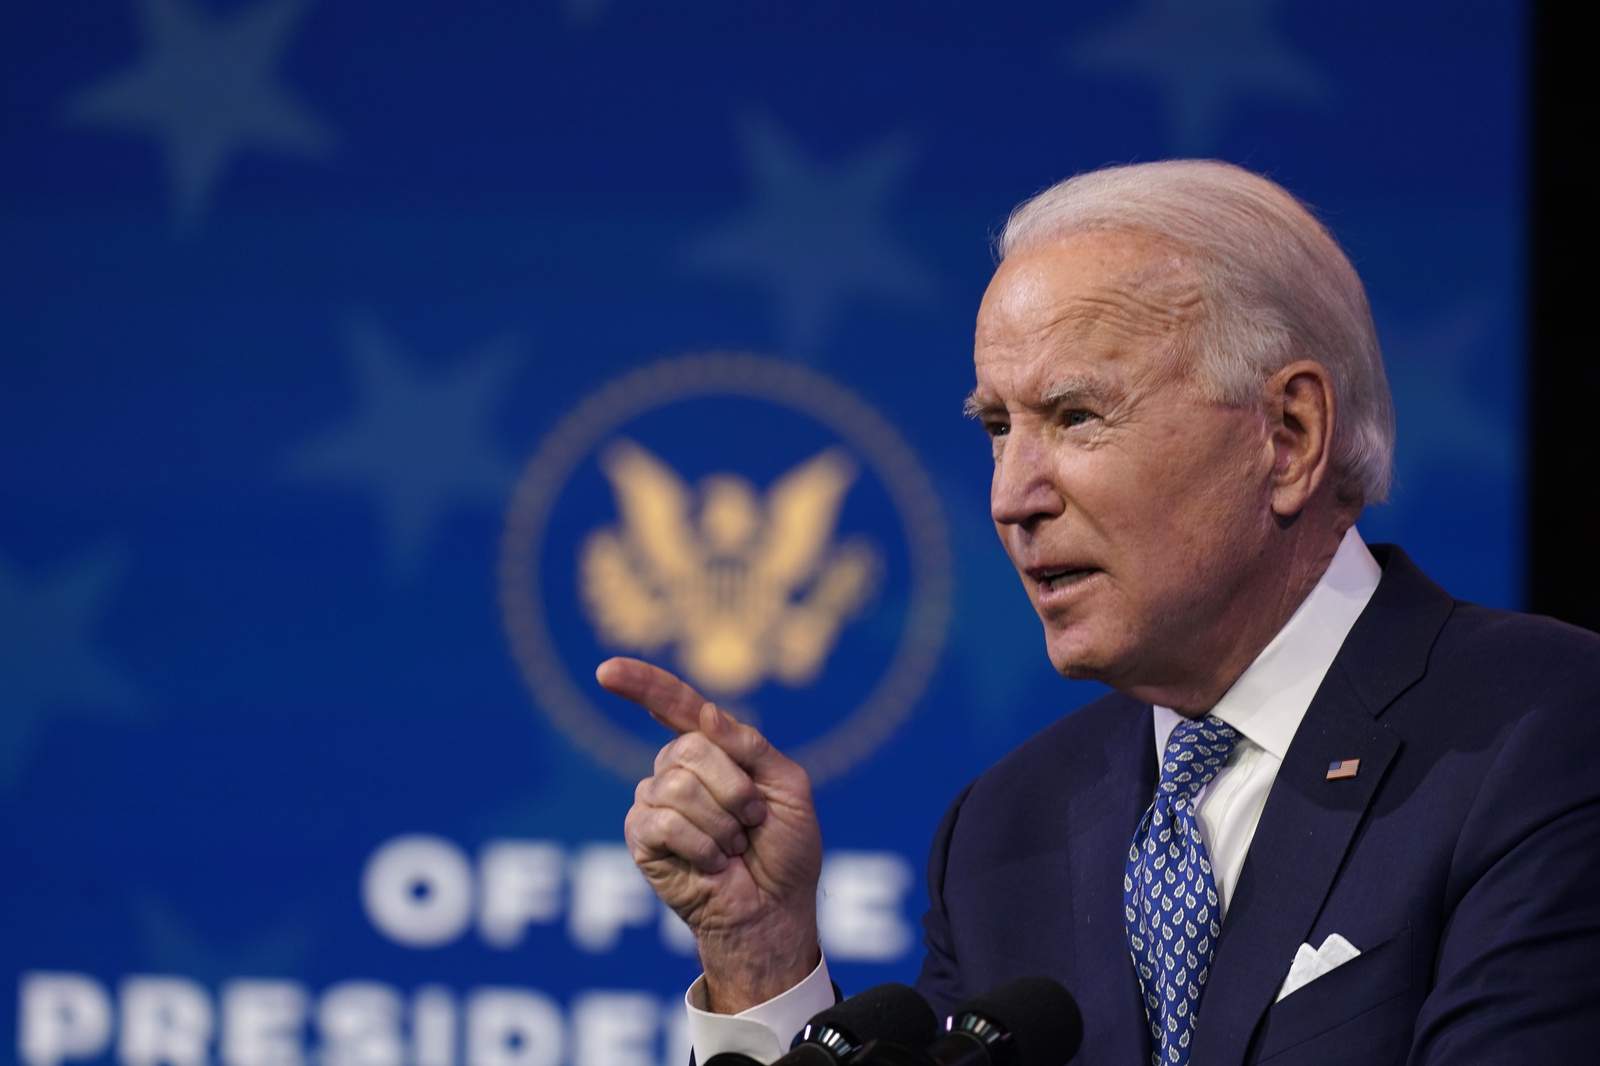 The Latest: Biden says months to fix Trump border policies